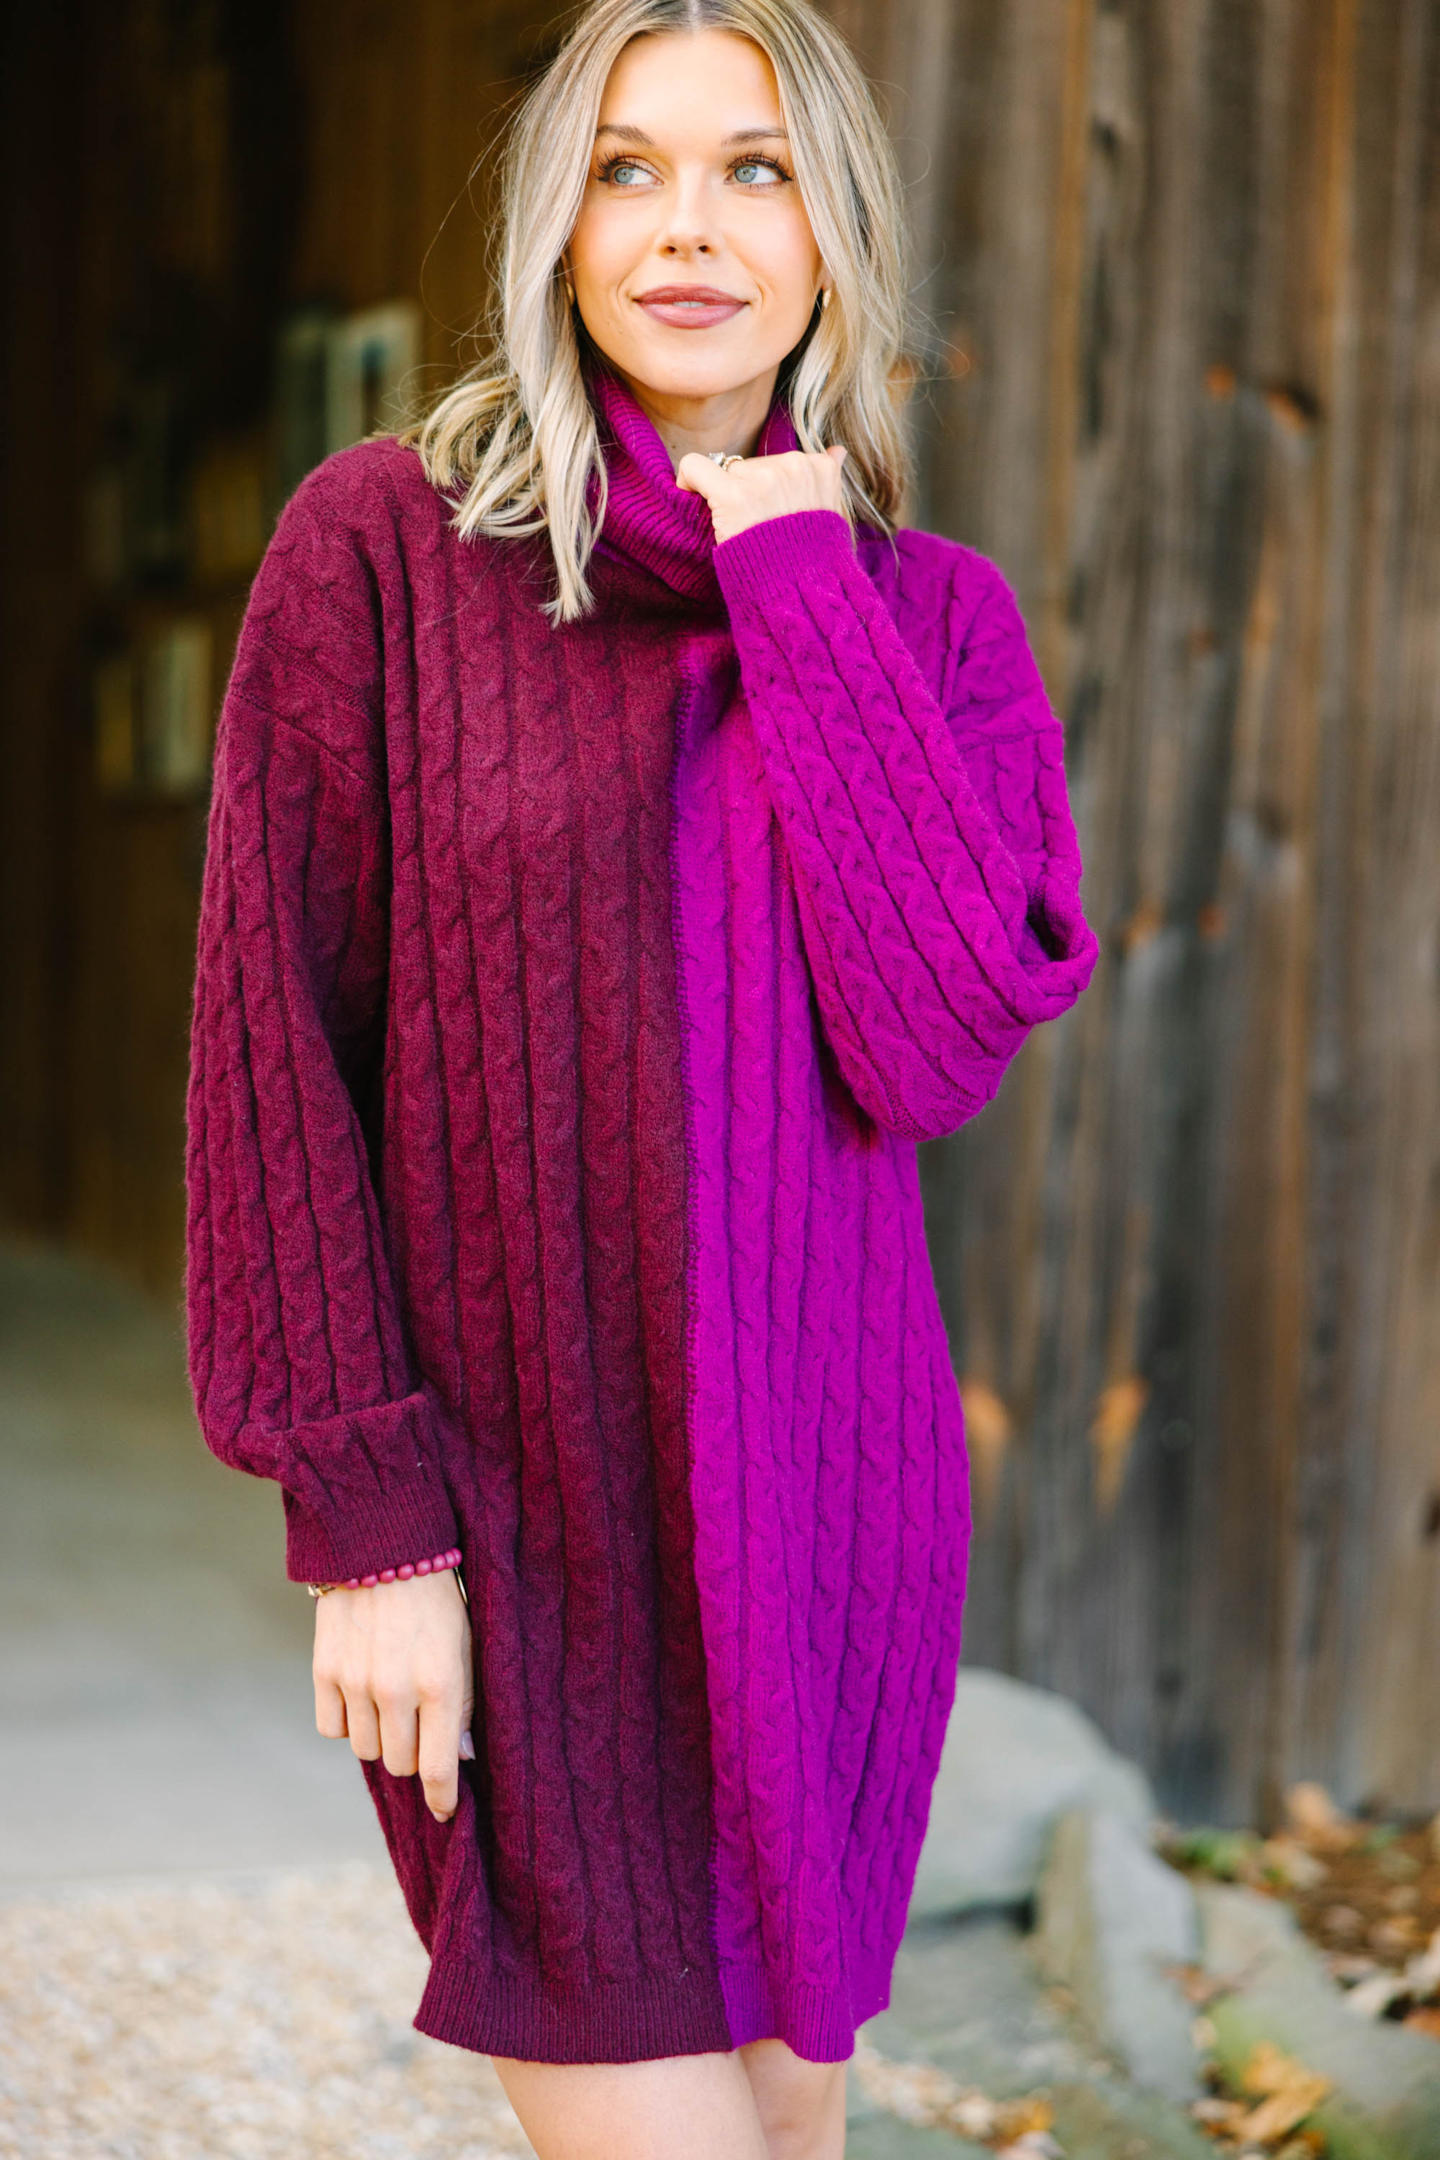 https://shopthemint.com/products/its-your-story-burgundy-colorblock-sweater-dress?variant=39724649513018